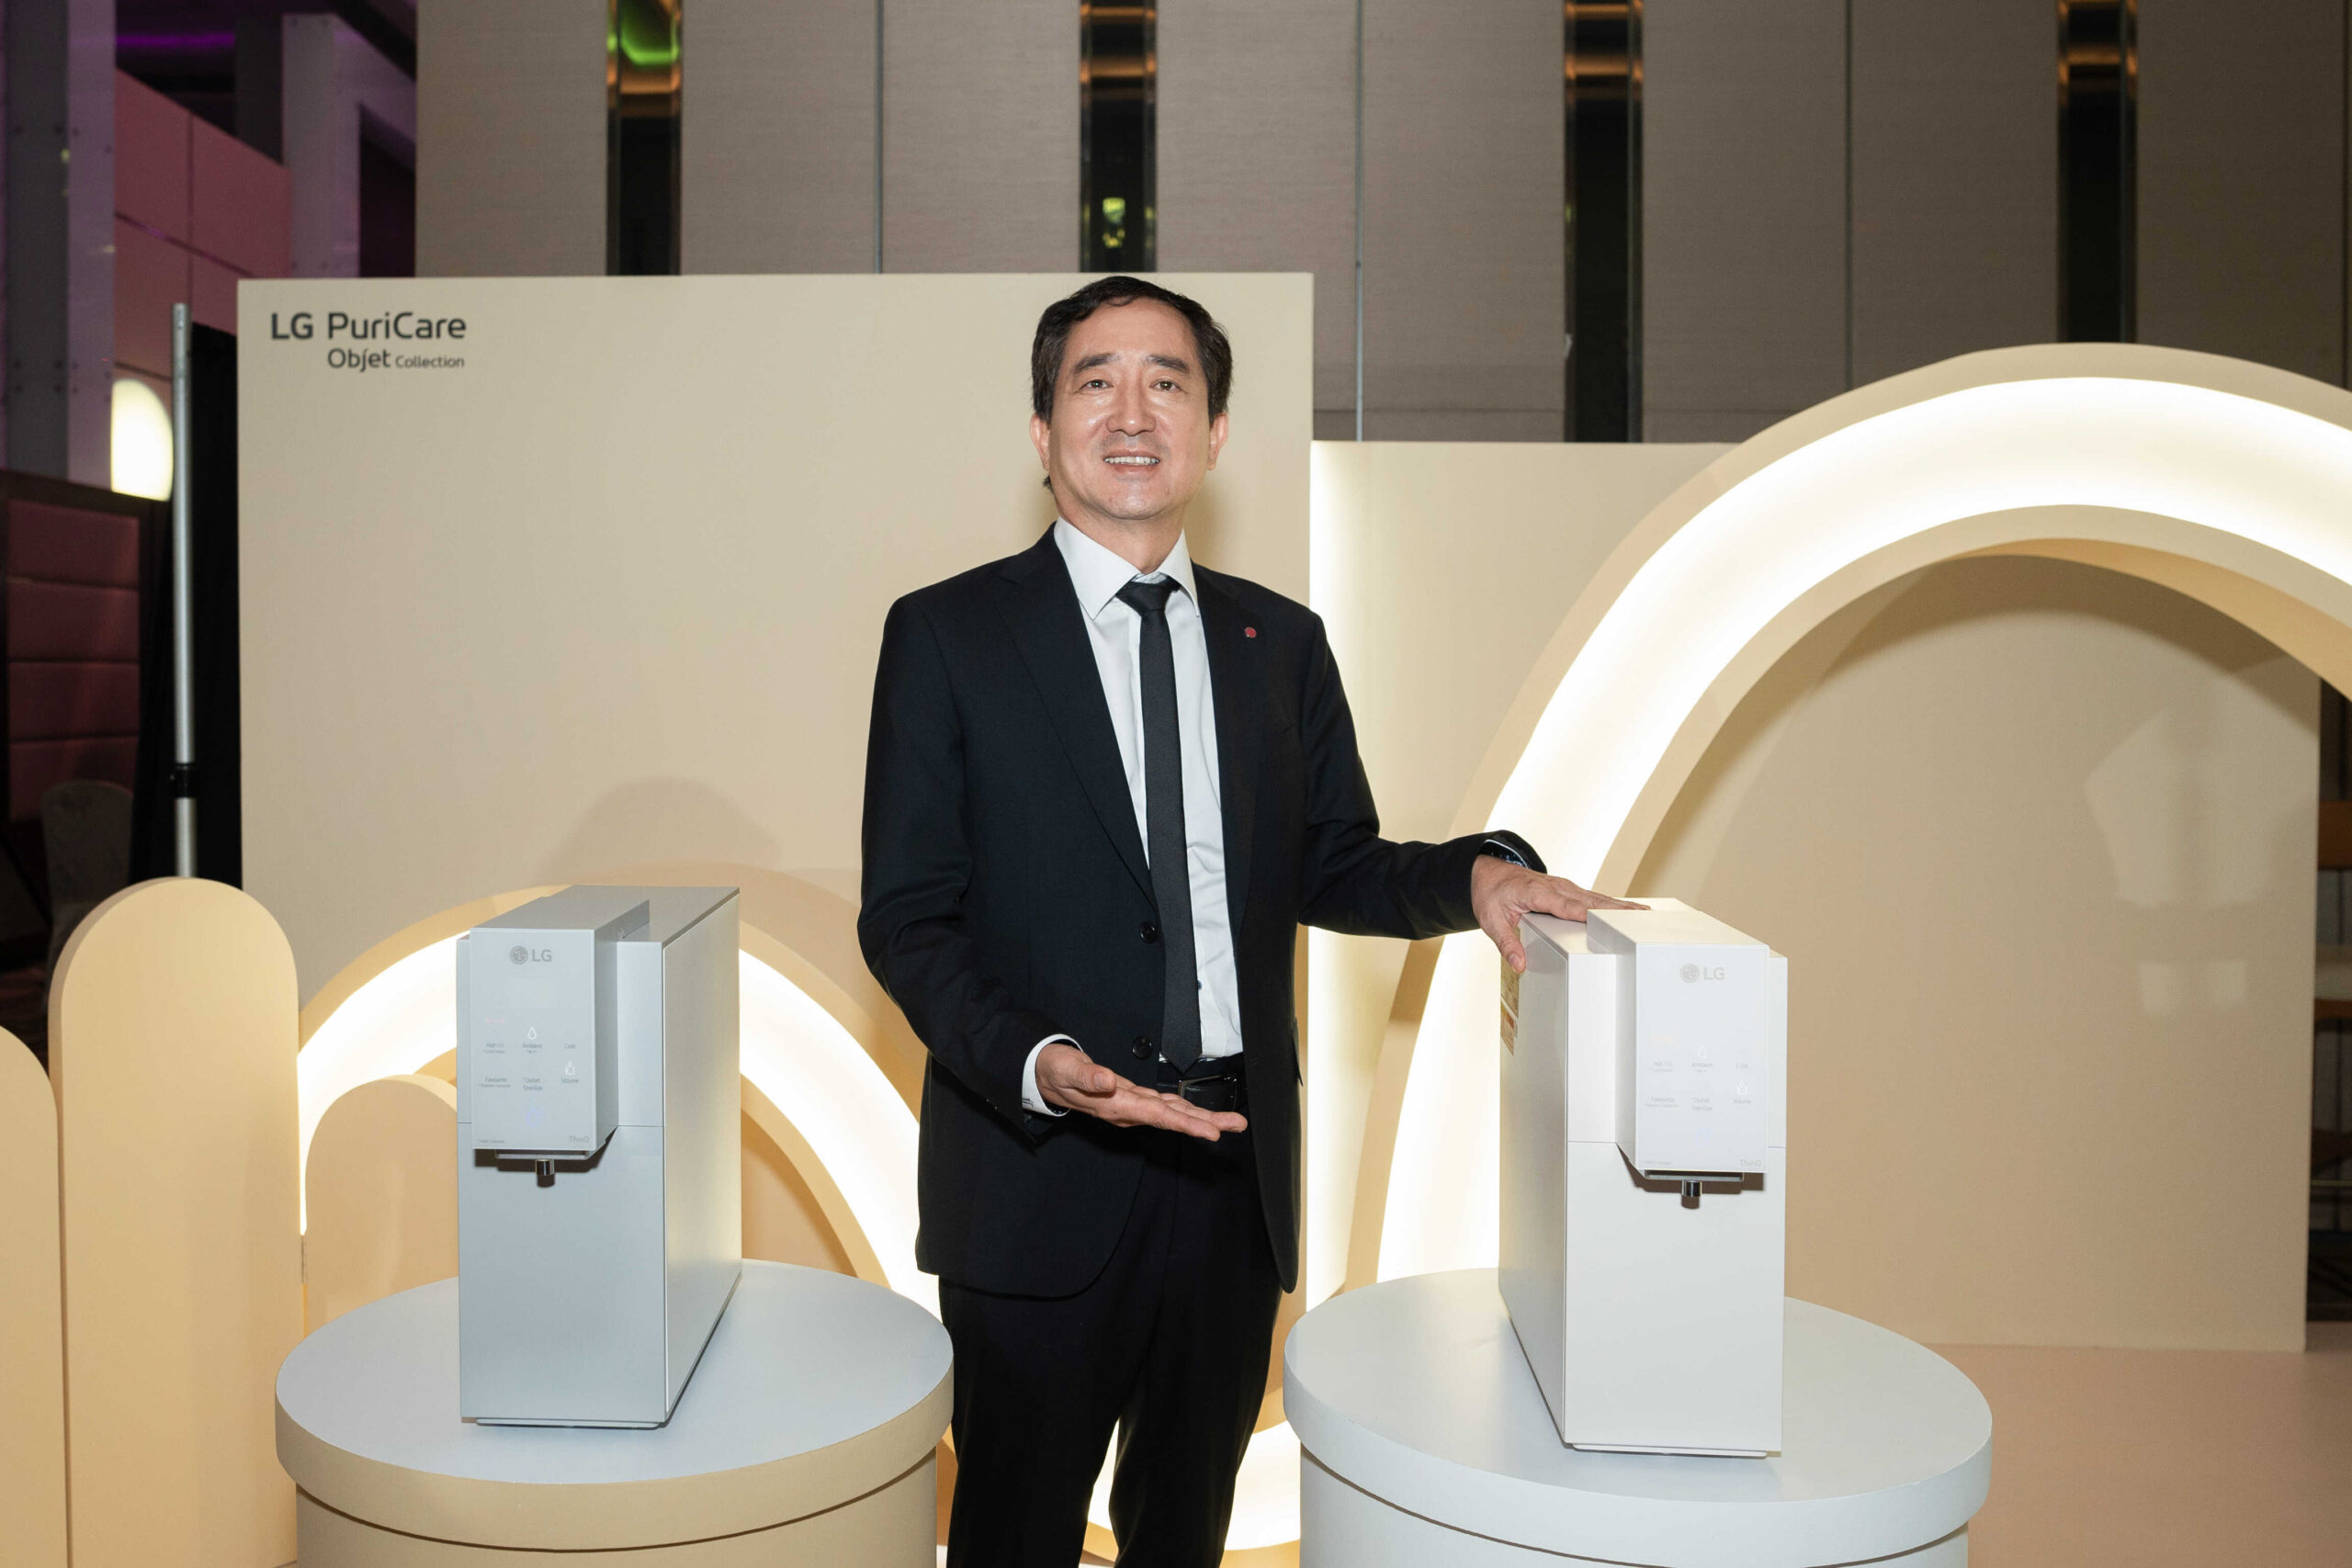 Malaysia can now colour their home and life with lg's latest self-service tankless water purifier